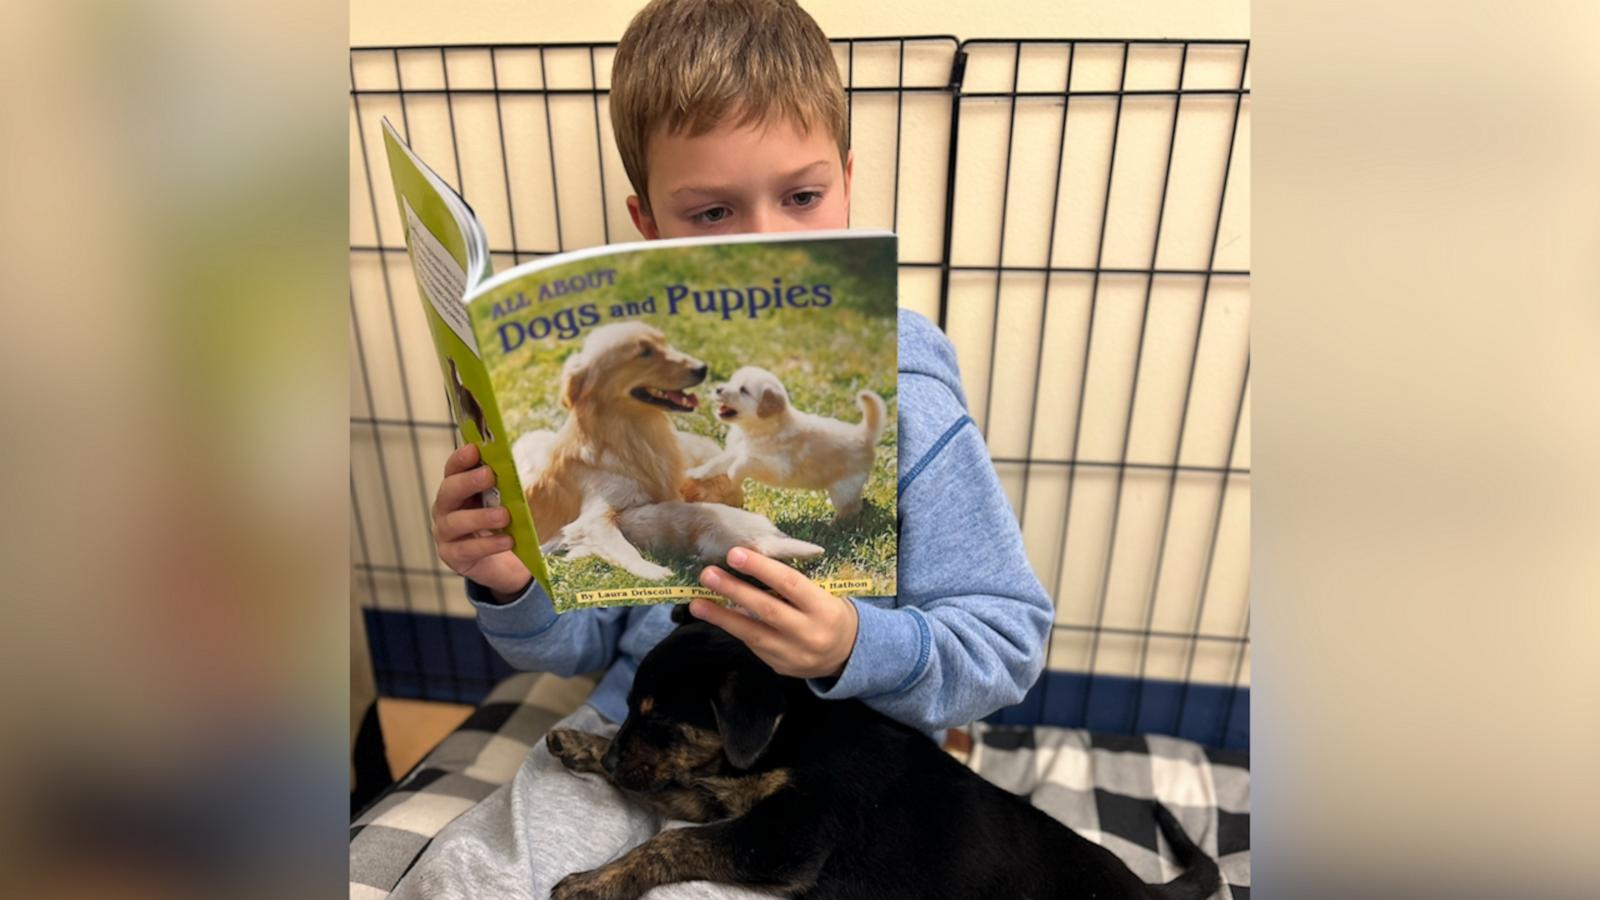 VIDEO: First grade class uses foster puppies to enhance their reading skills